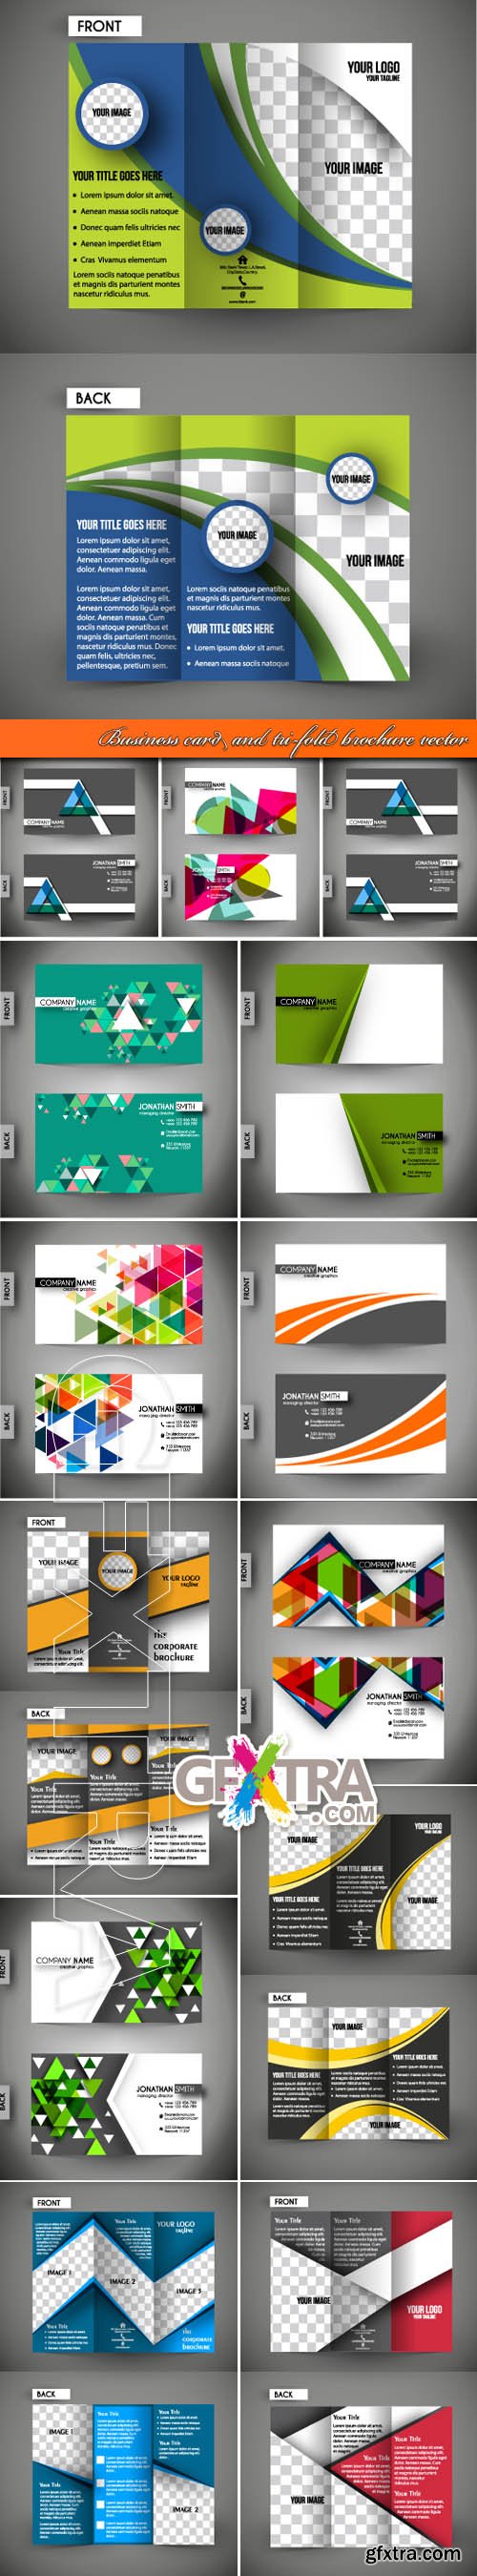 Business card and tri-fold brochure vector